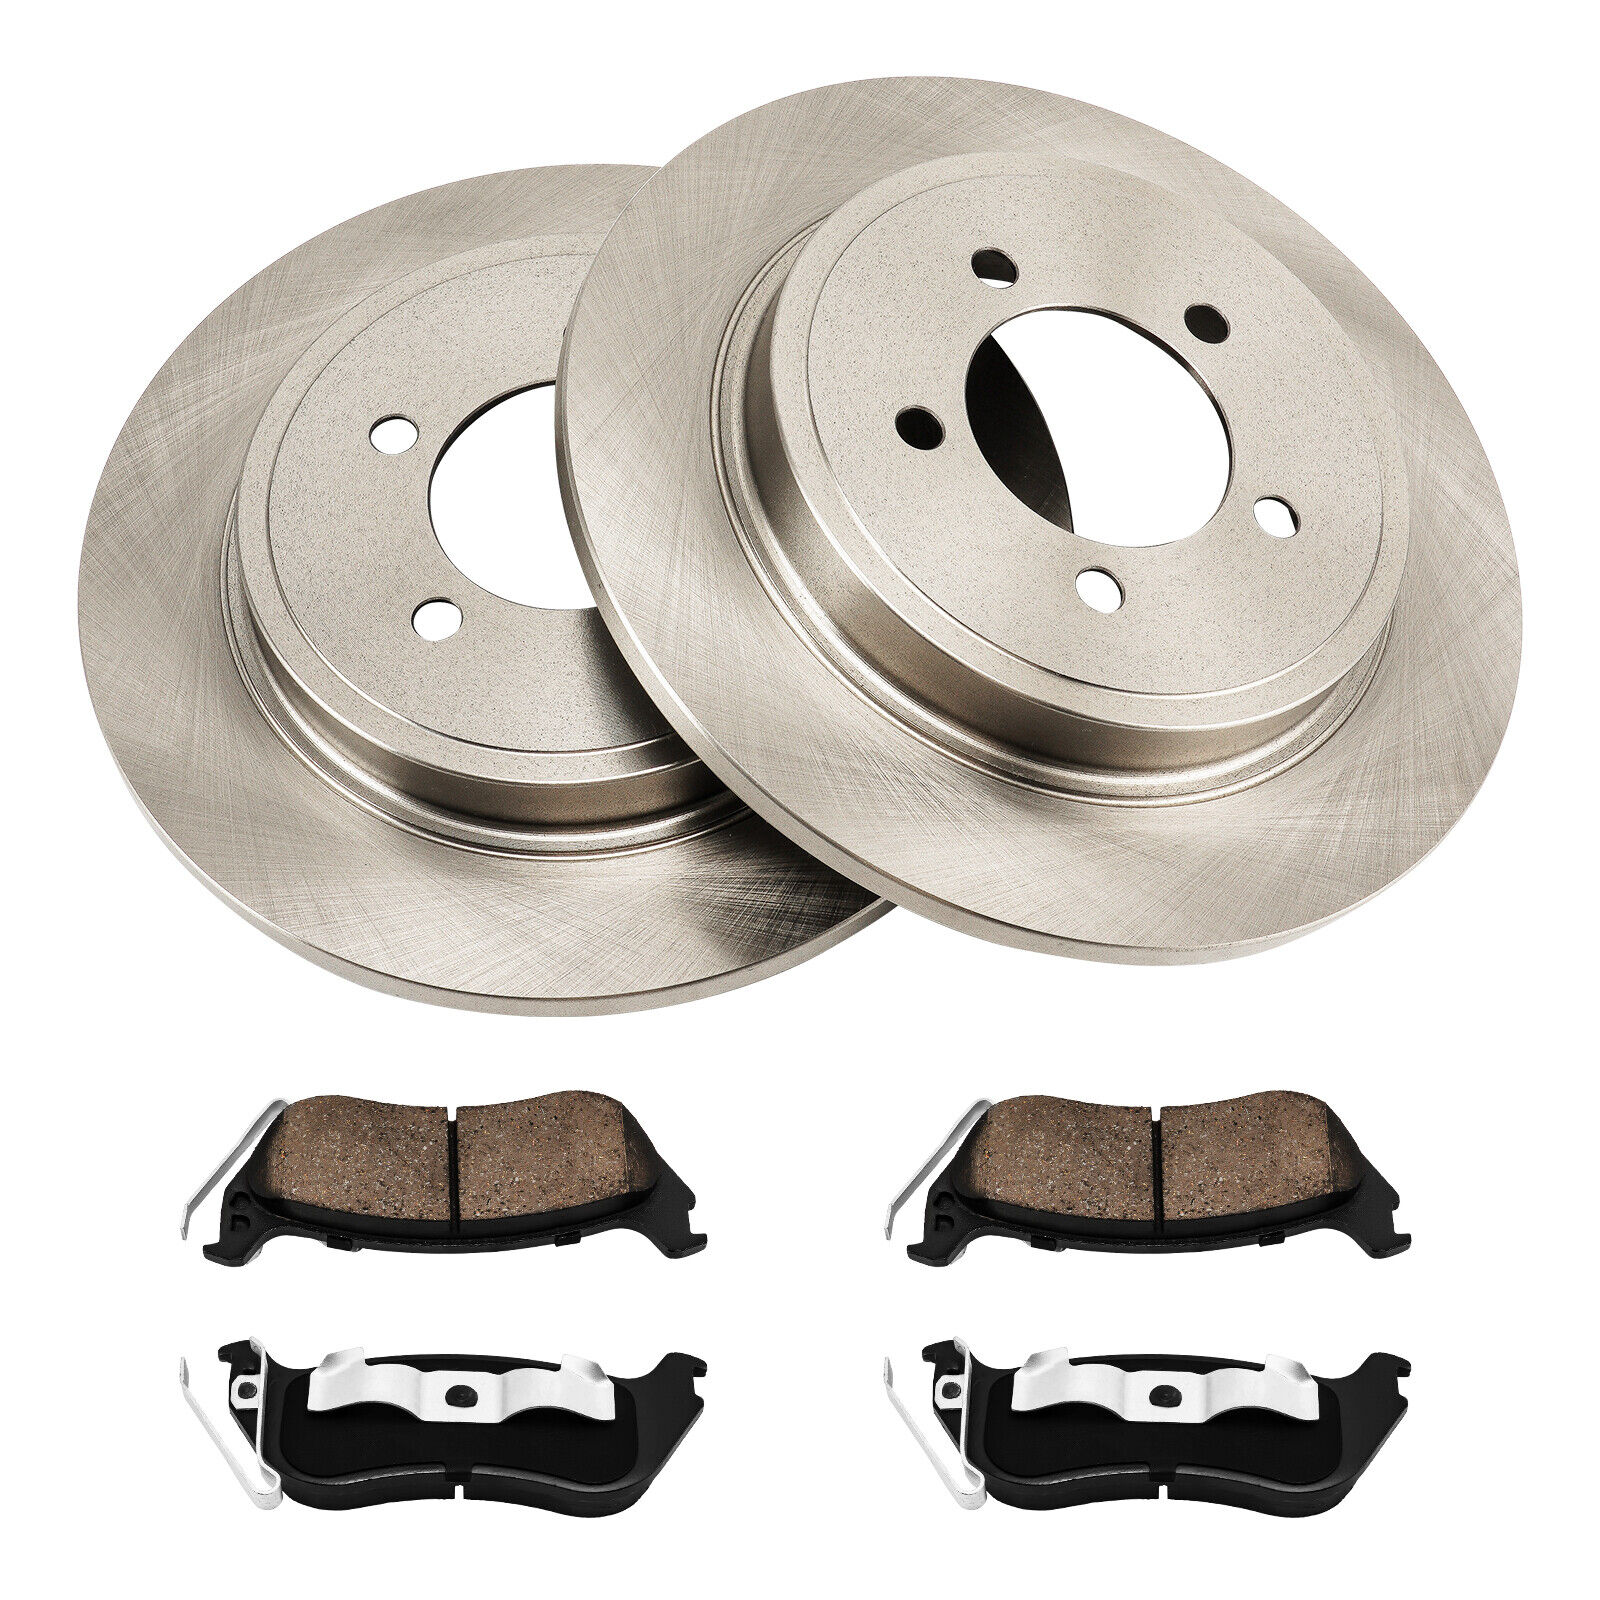 54098 Rear Solid Brake Rotors W/ Ceramic Pads For Ford Explorer Mountaineer